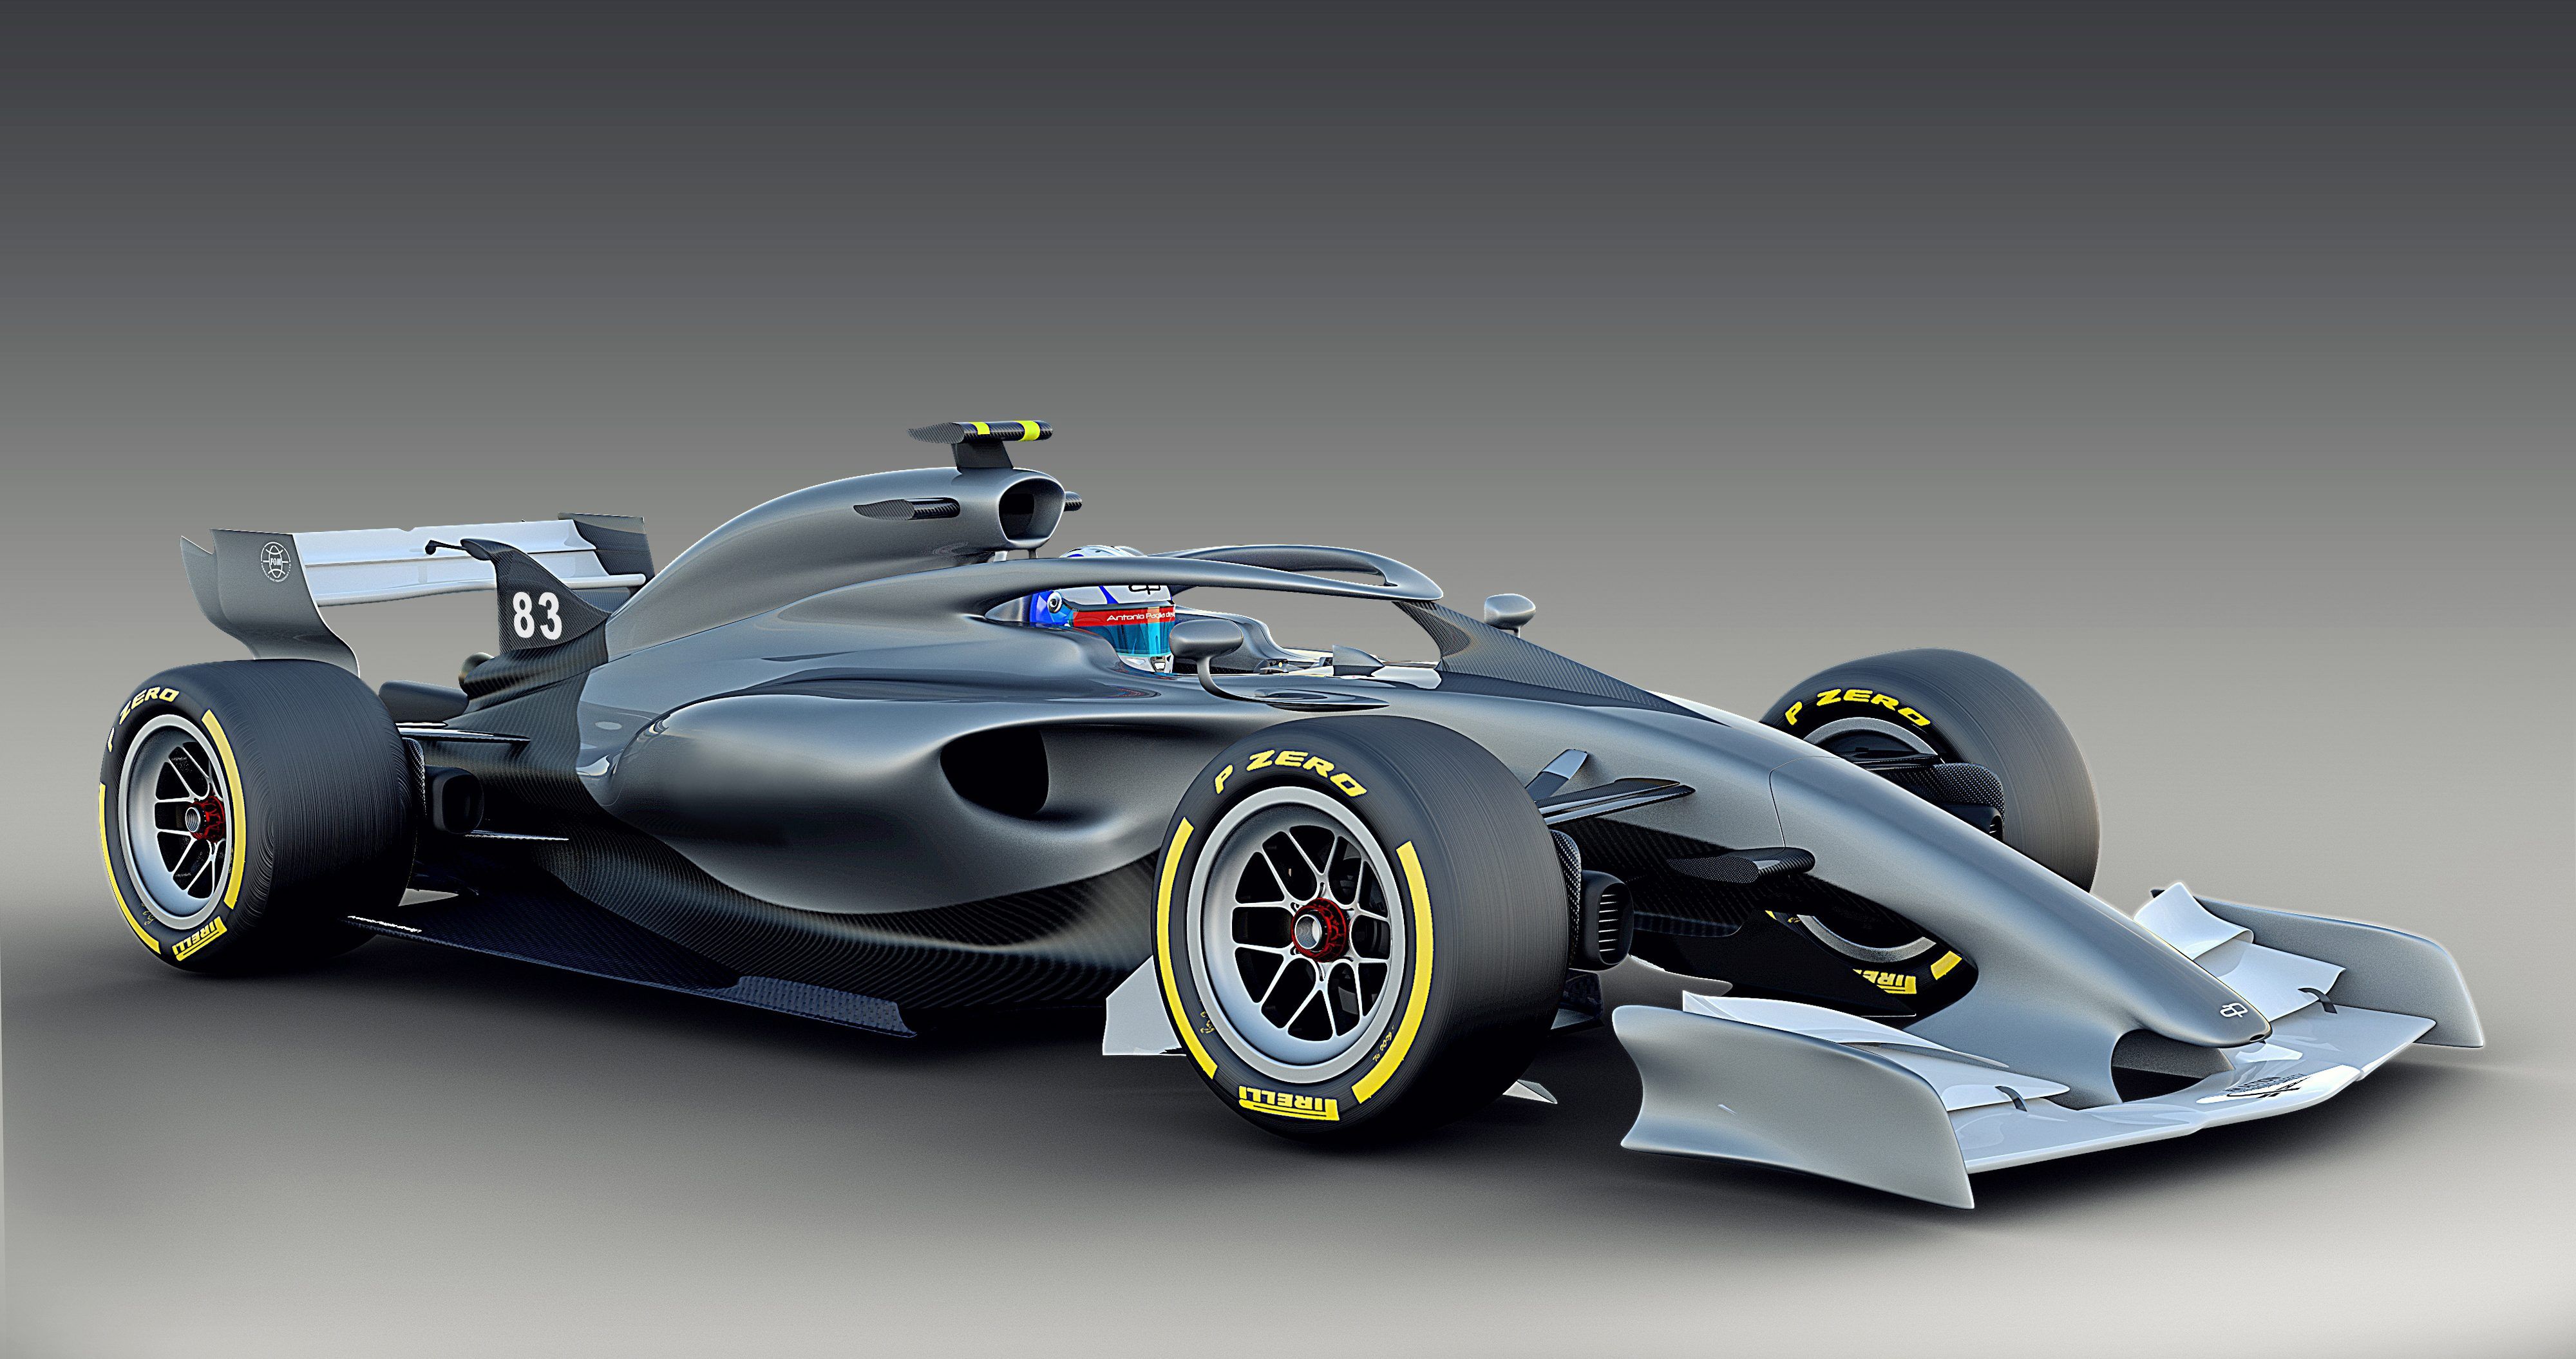 A concept car ahead of the 2022 F1 regulation changes